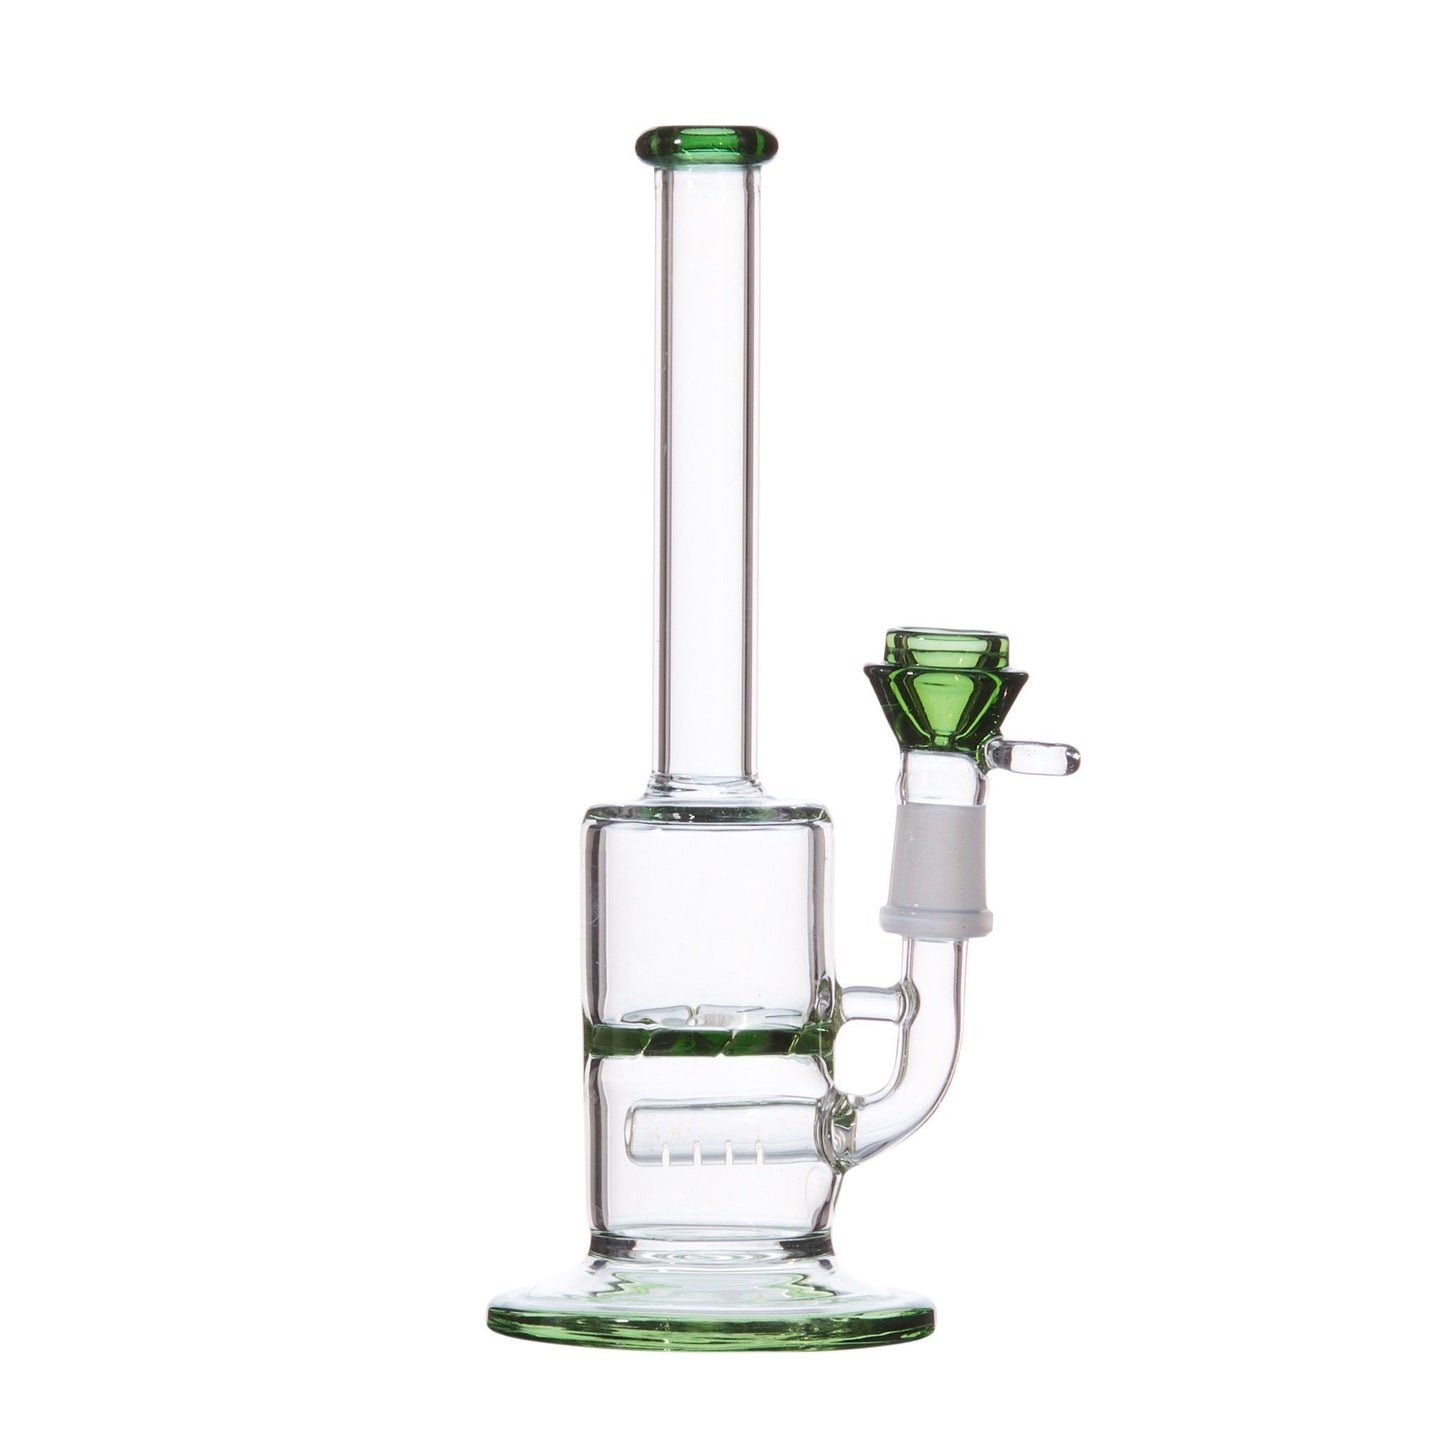 7.5-inch glass bong smoking device classic shape 3mm thickness sturdy baseeasy-to-use refreshing accents